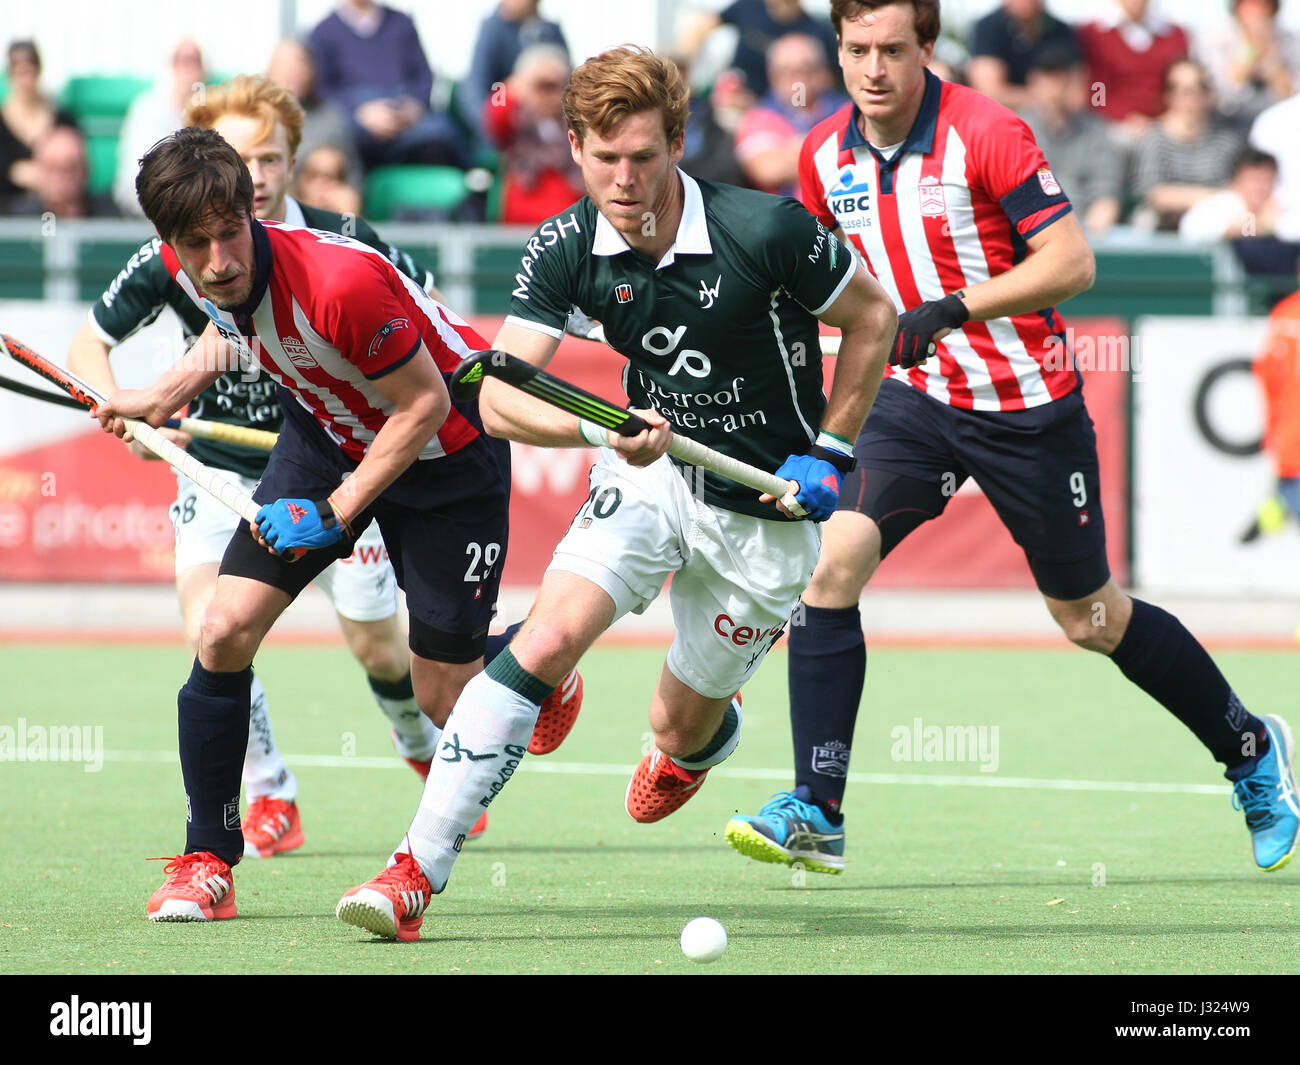 Waterloo, Belgium. 01st May, 2017. Honor Mens National League Sydney Cabuy of Waterloo in game action, during the match Waterloo Ducks-Leopold Stock Photo